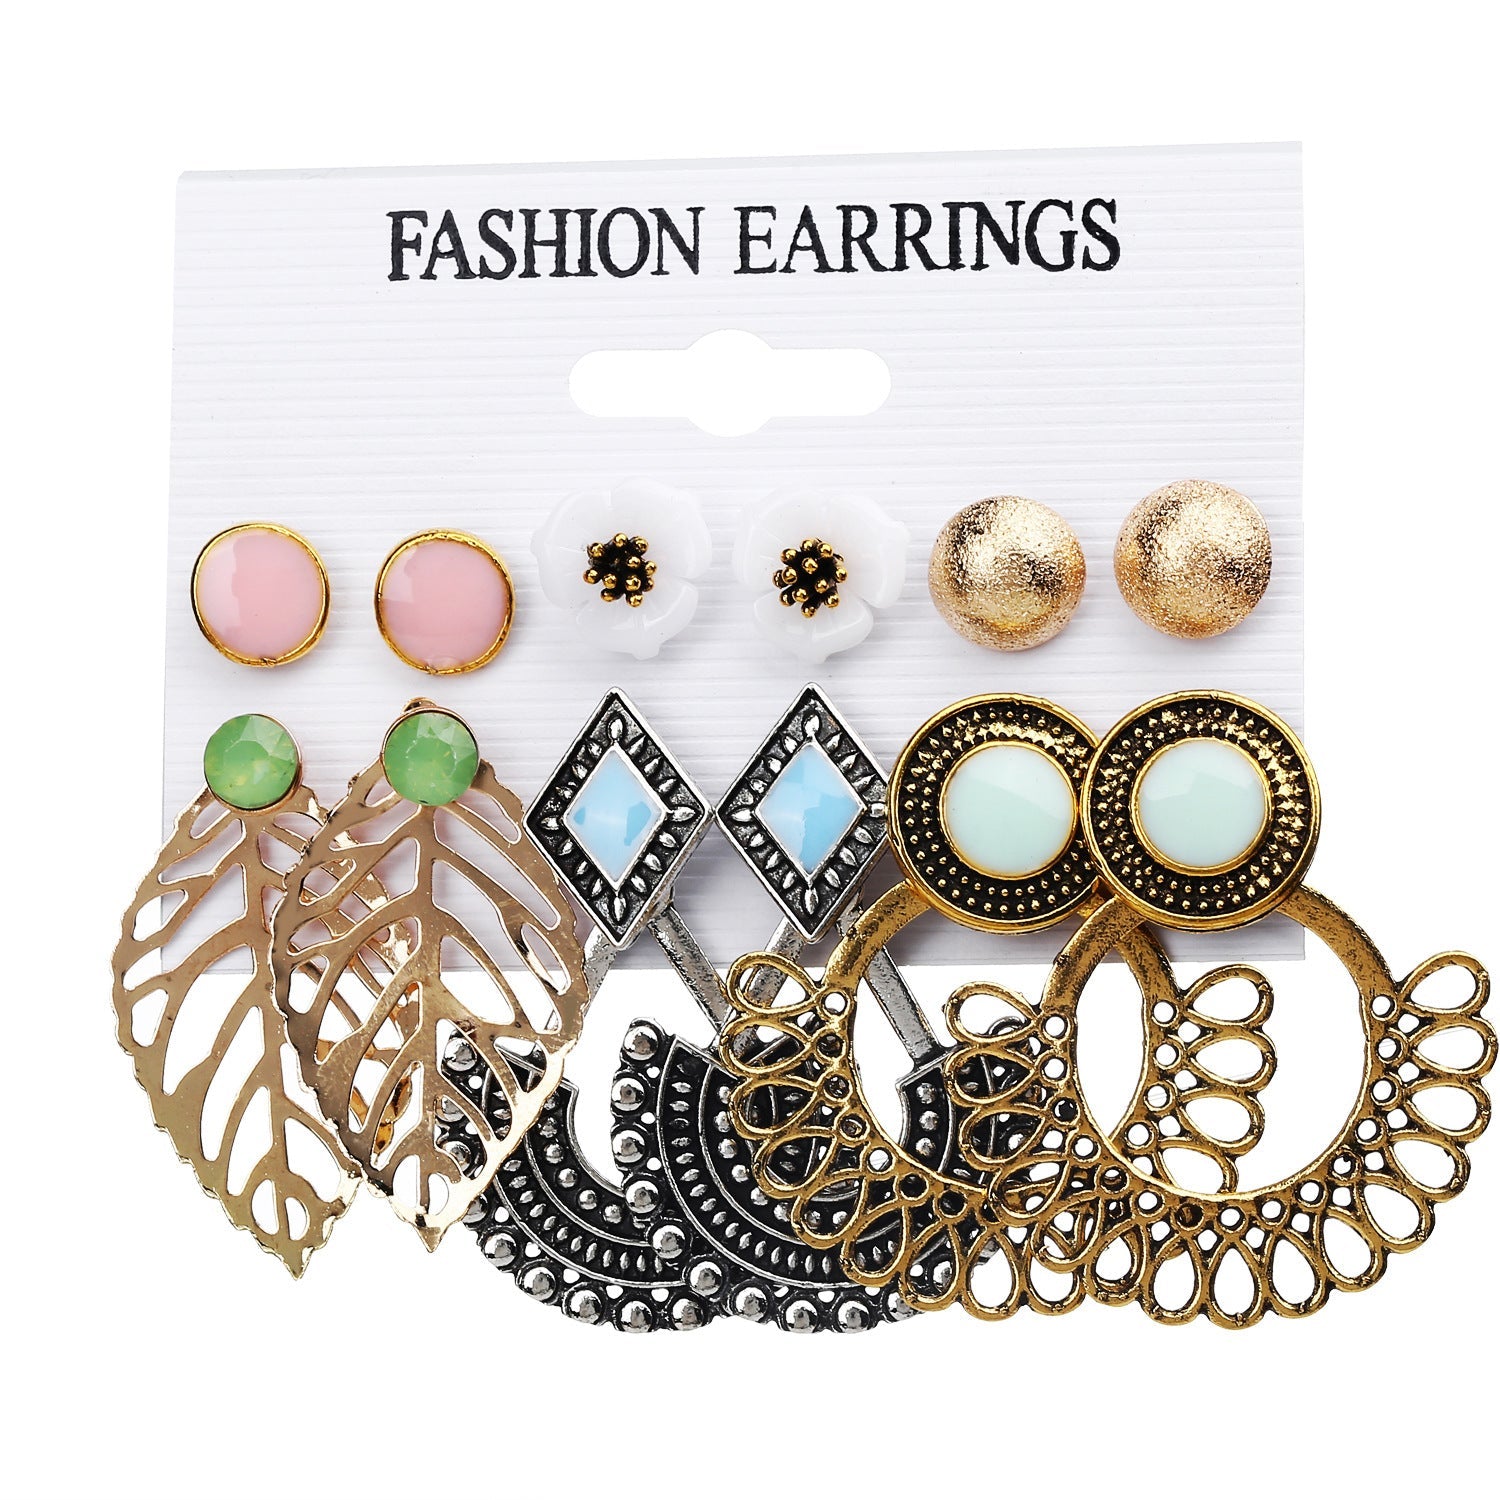 6 pairs Ethnic Earrings - Negative Apparel